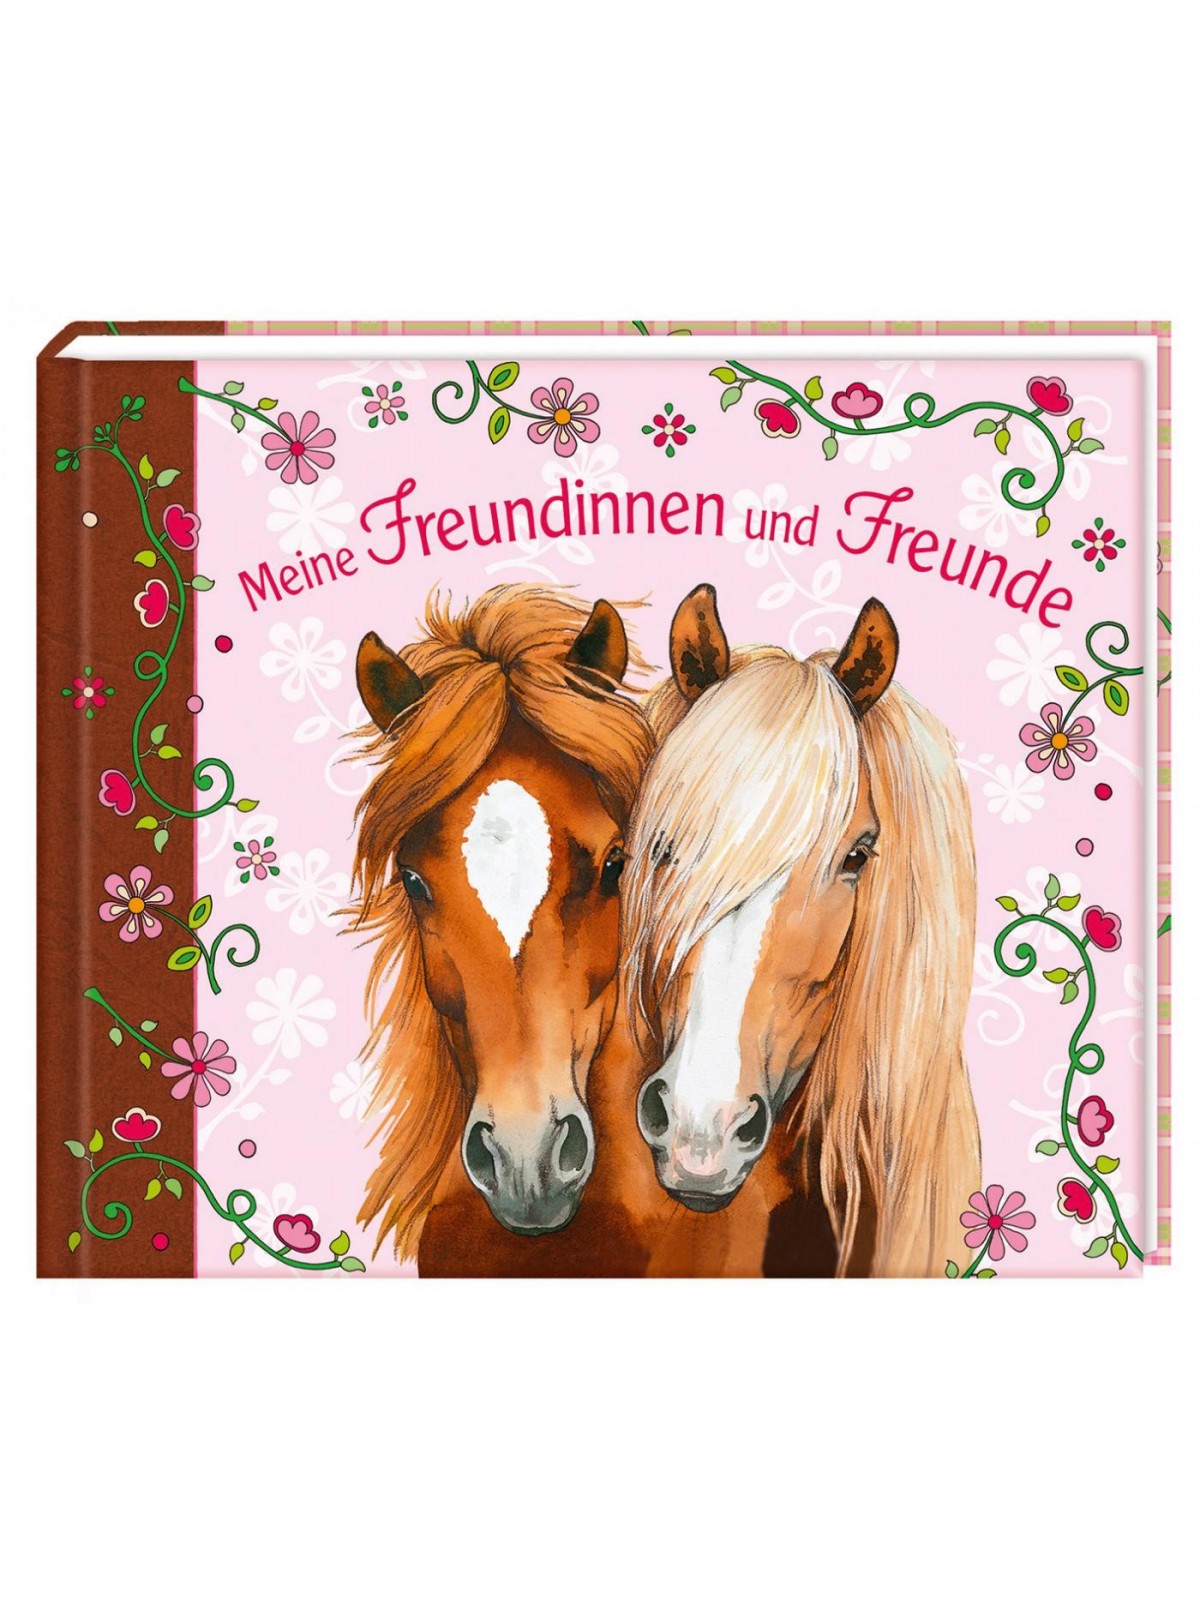 Friends Book with Horse Images